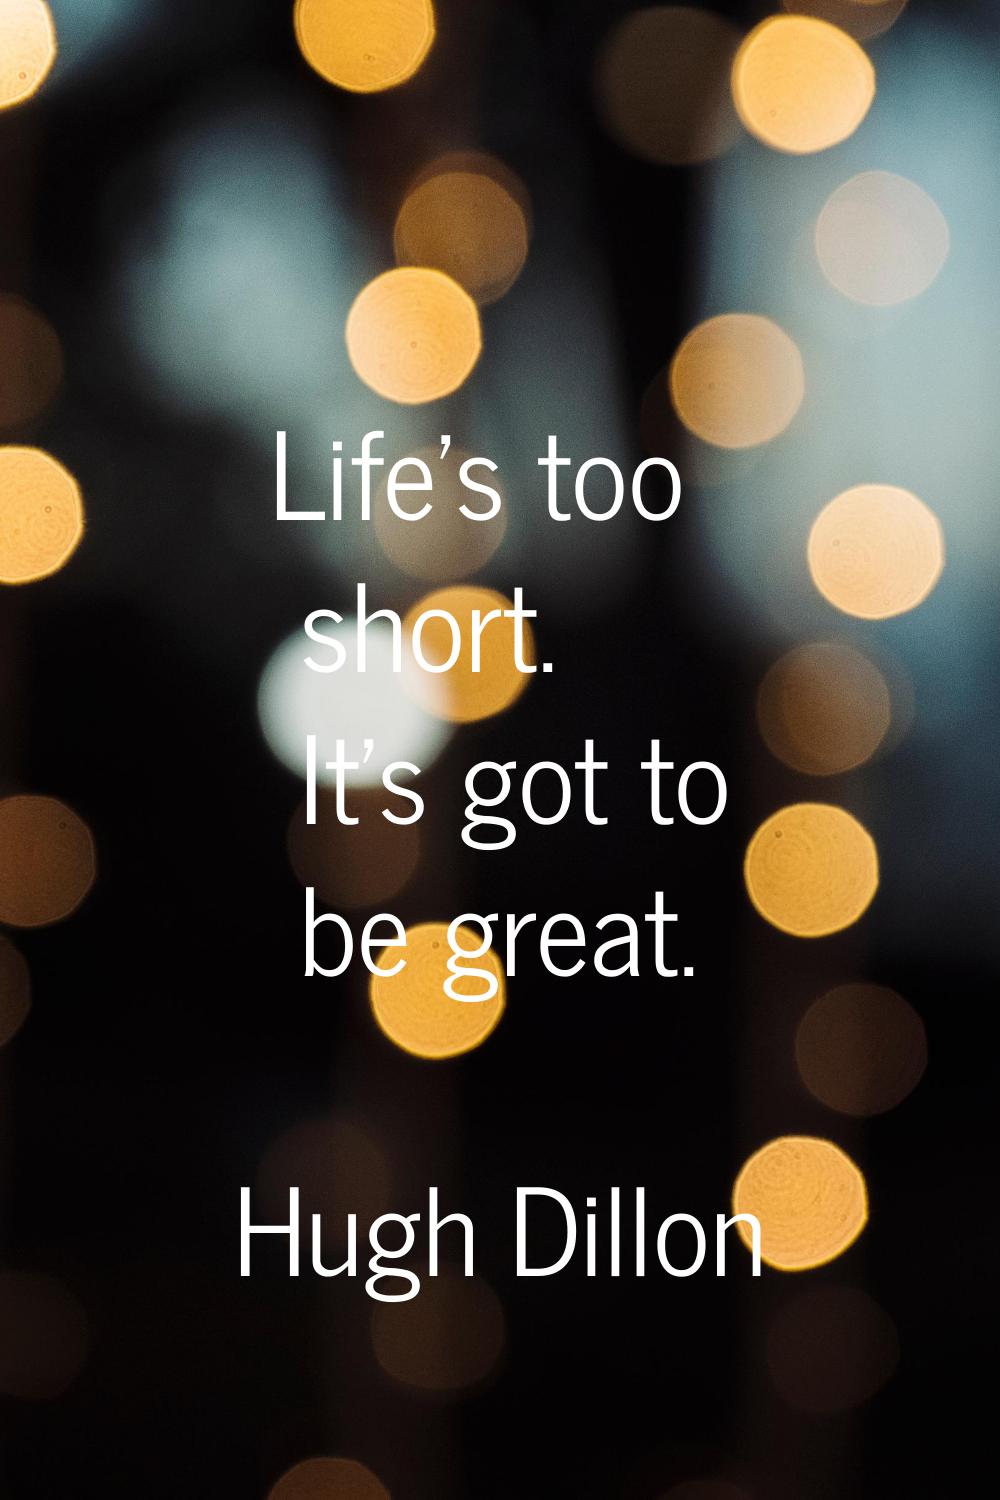 Life's too short. It's got to be great.